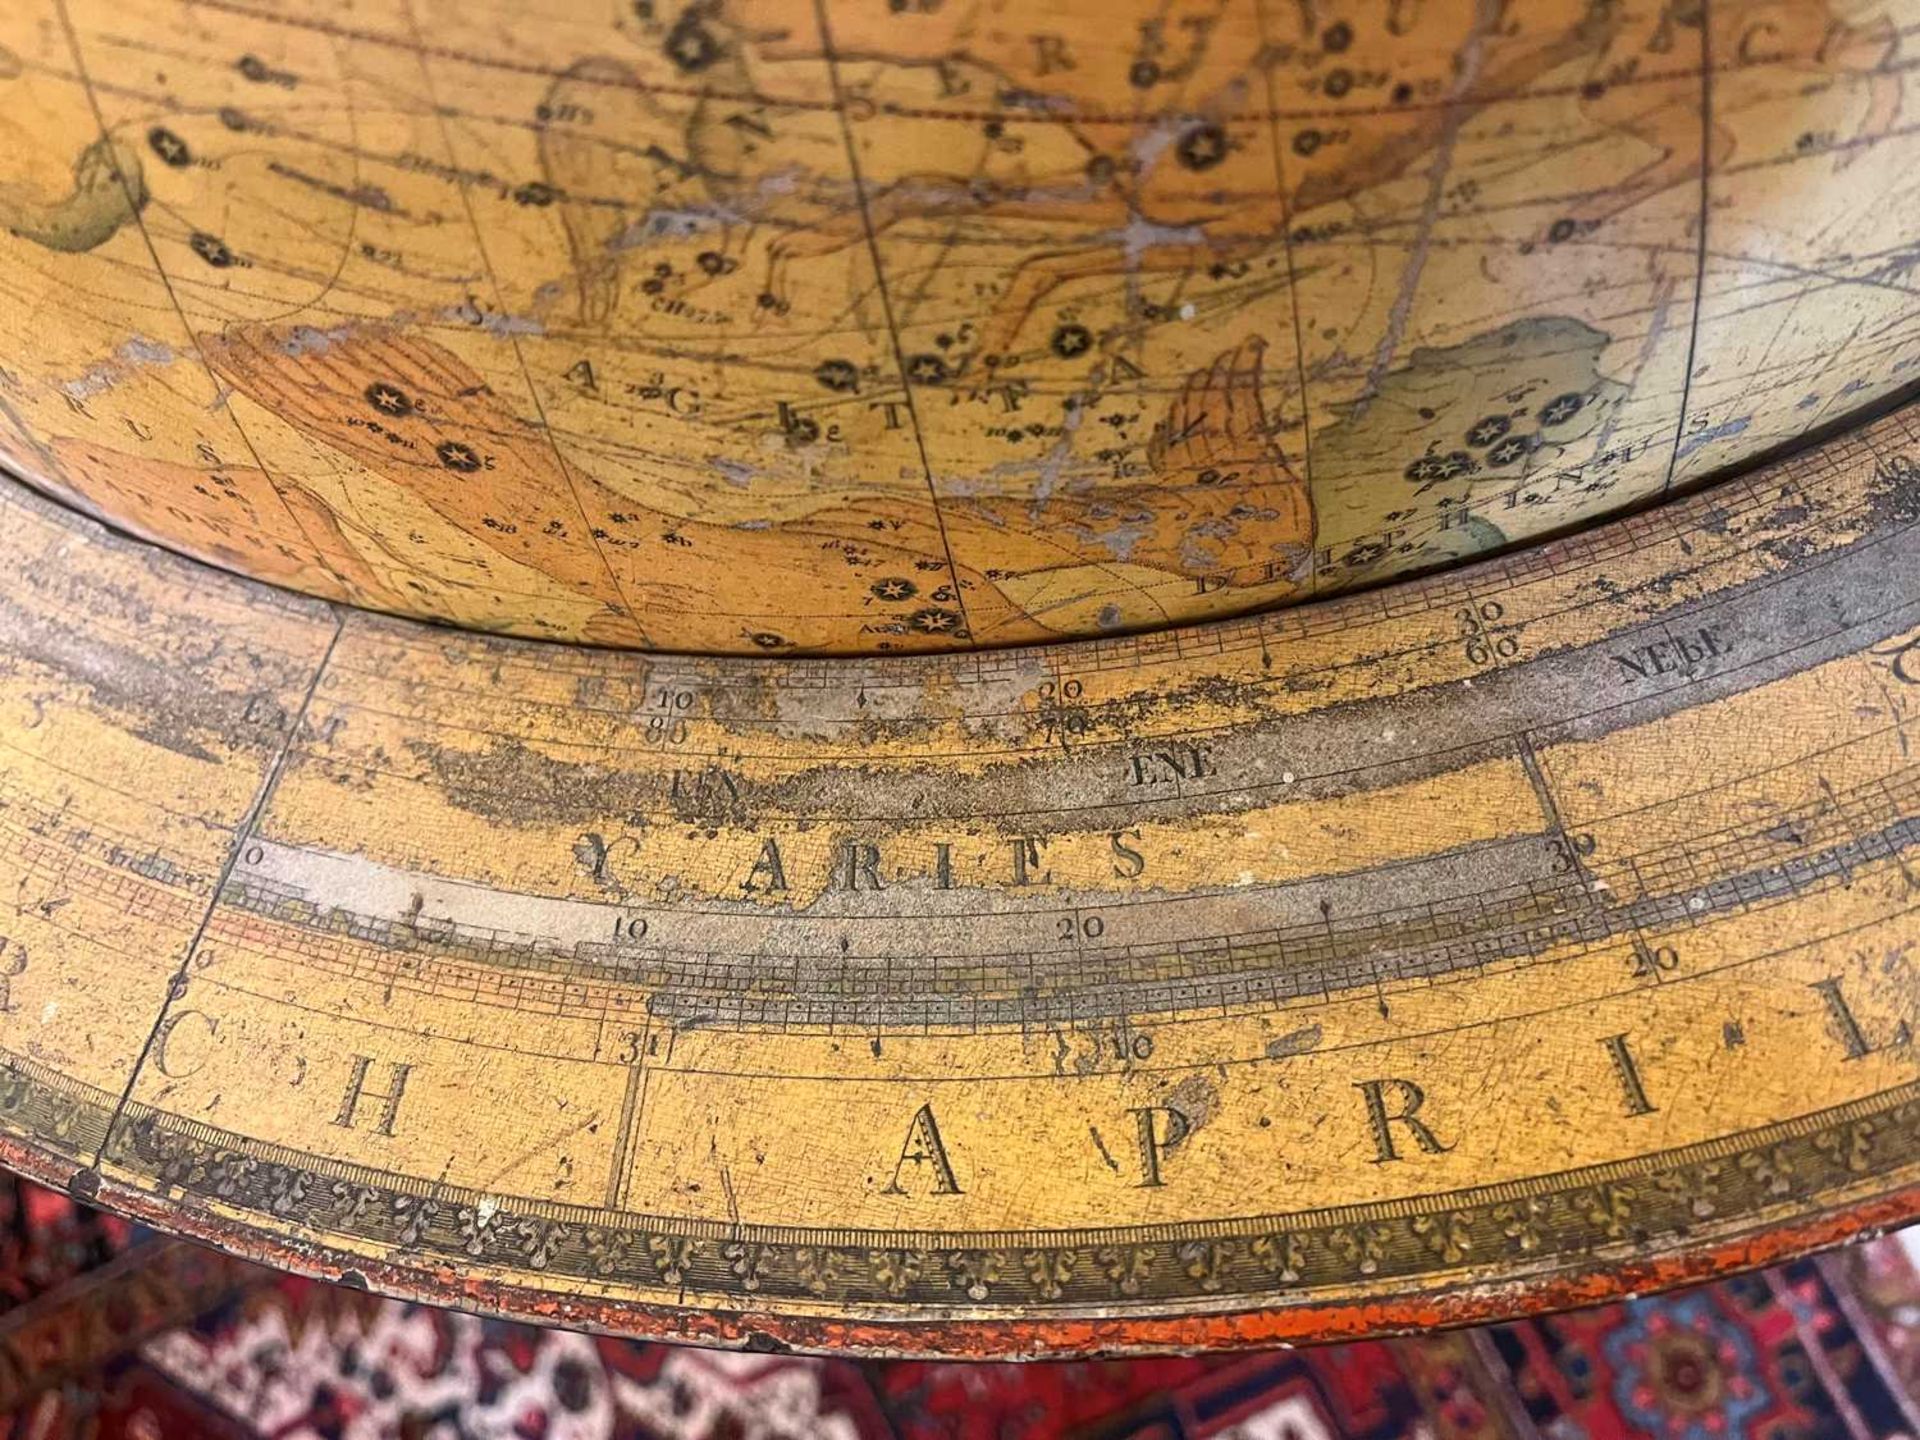 A large celestial library globe by J & W Cary, - Image 76 of 84